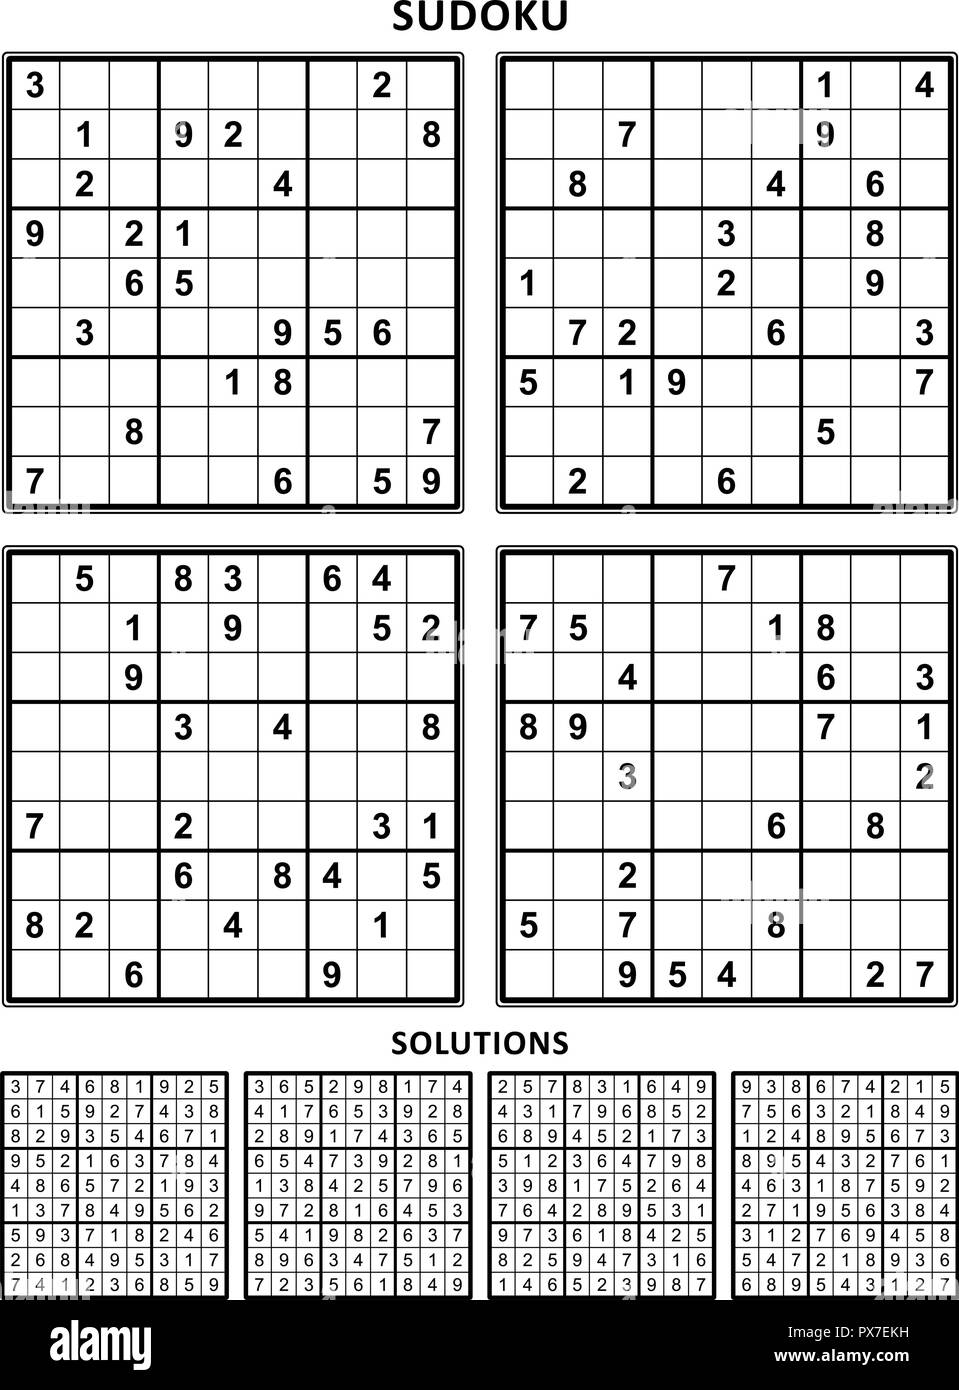 four-sudoku-puzzles-of-comfortable-easy-yet-not-very-easy-level